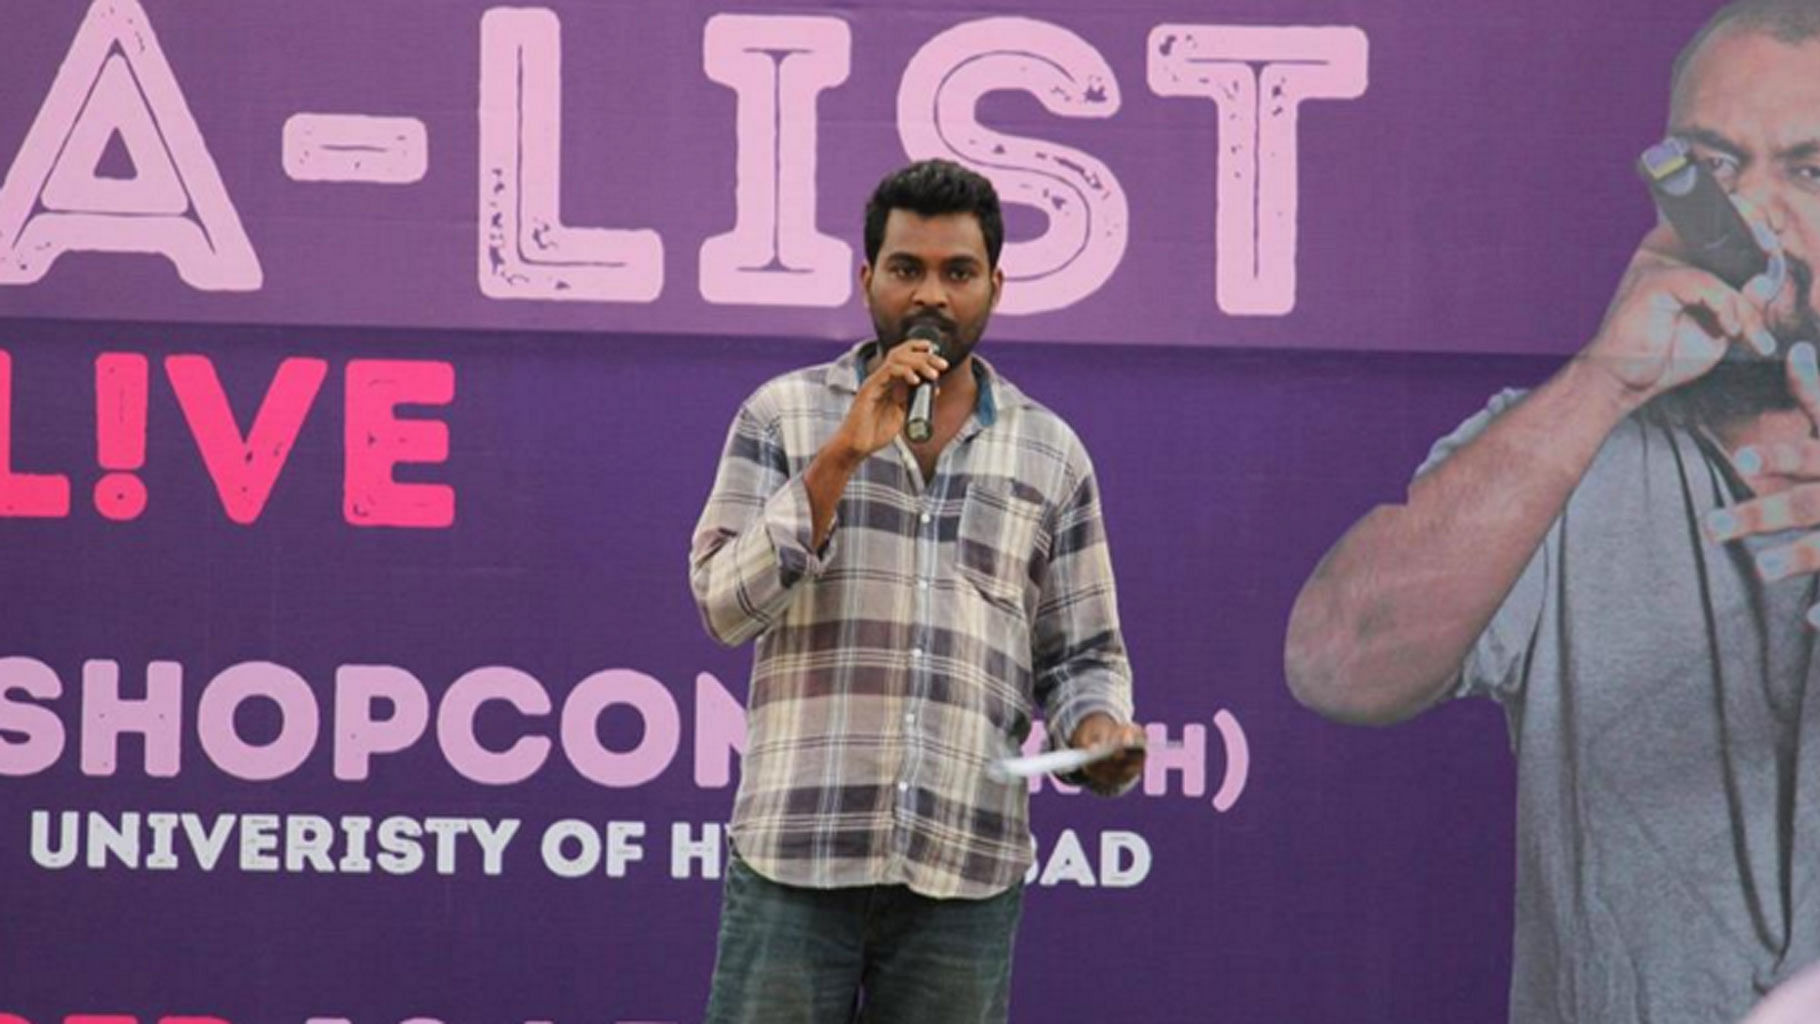 Rohith Vemula committed suicide on Sunday. (Photo courtesy: <a href="https://www.facebook.com/rohith352/media_set?set=a.1570023619026.2084527.1488562725&amp;type=3">facebook.com/rohith352</a>)